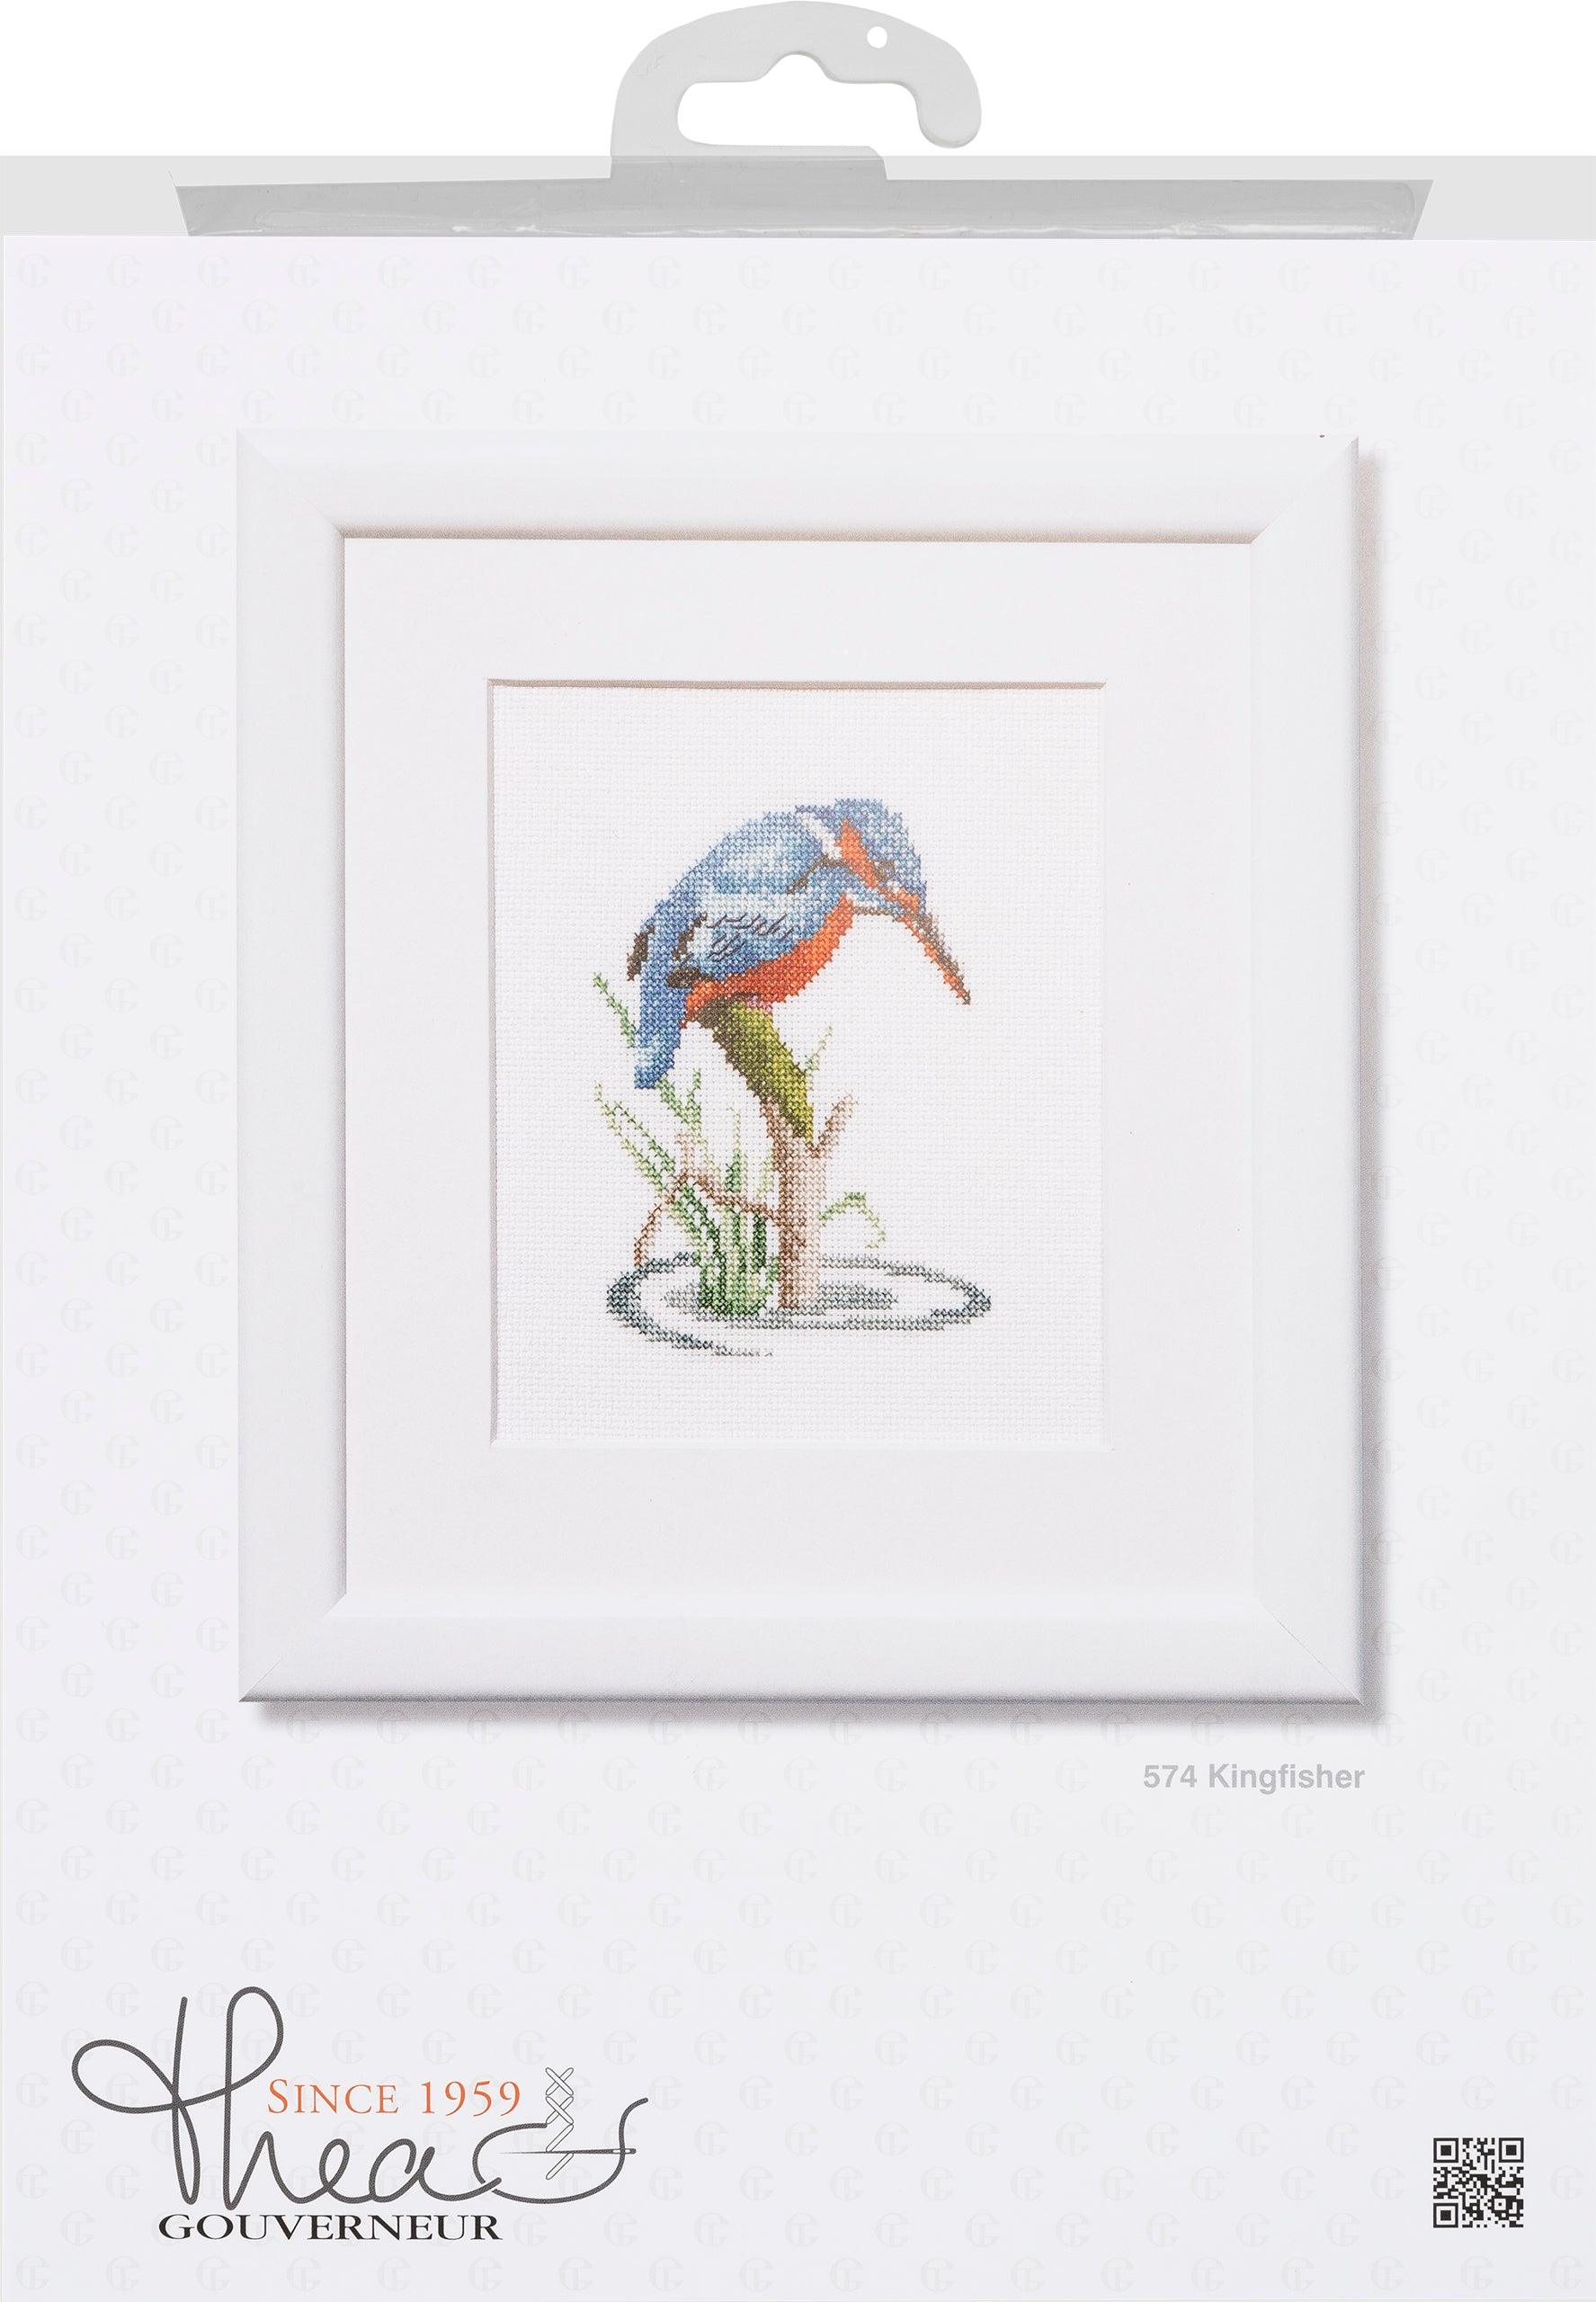 Thea Gouverneur - Counted Cross Stitch Kit - Kingfisher - Aida - 14 count - 574A - Thea Gouverneur Since 1959